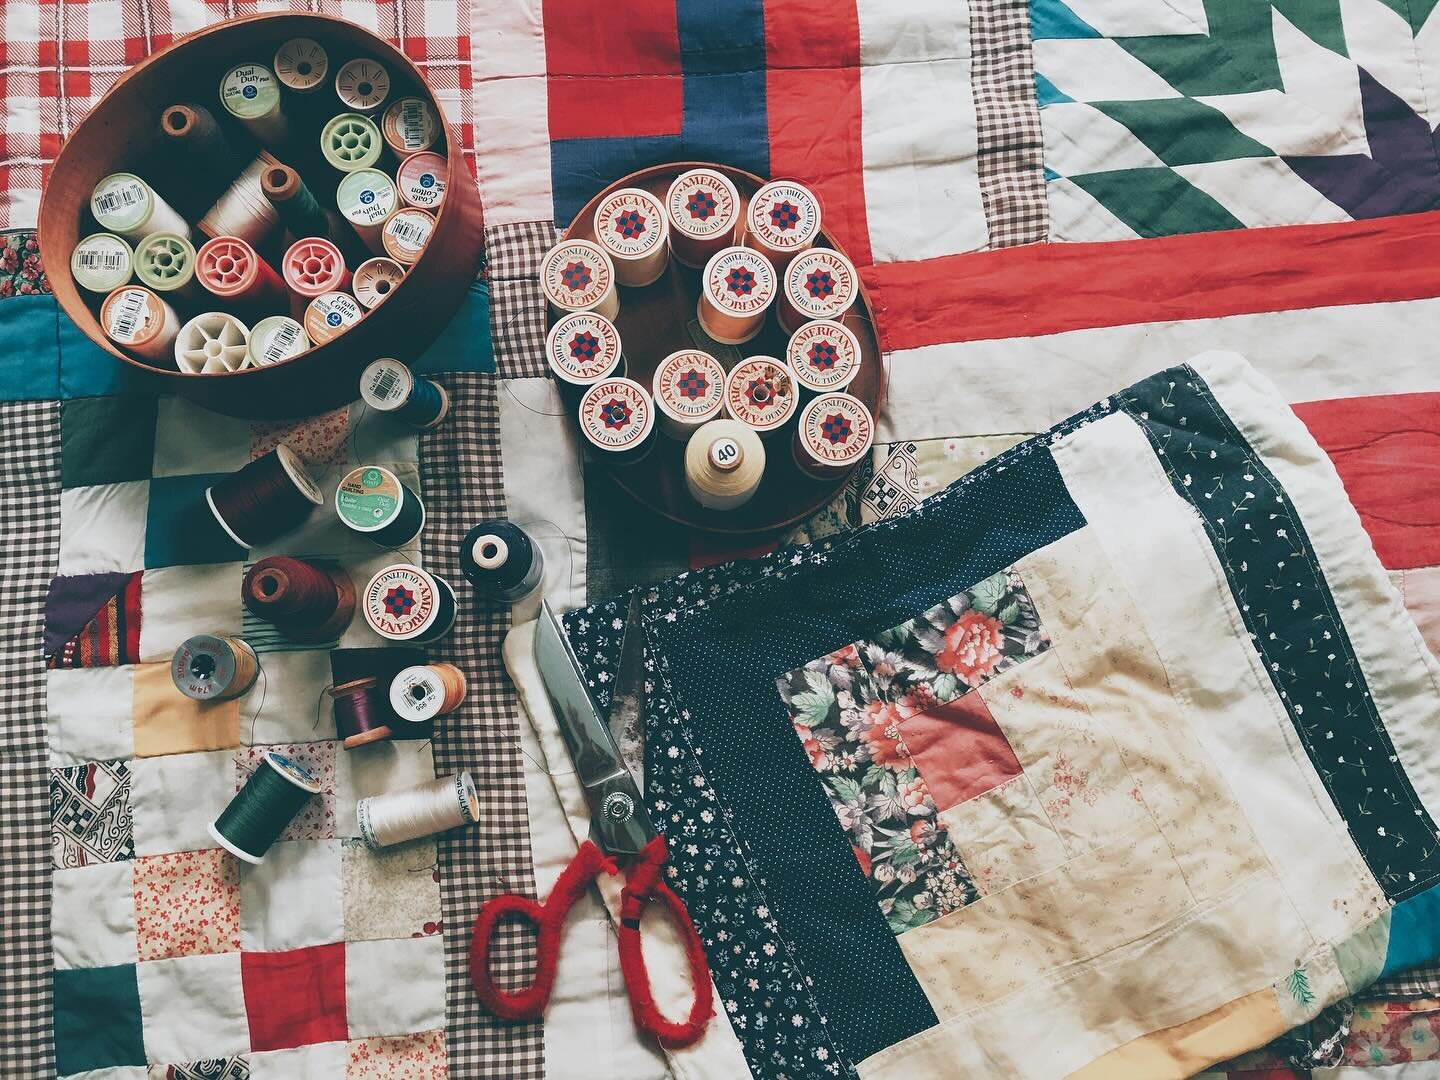 We&rsquo;ve been spring cleaning and going through our arts and craft supplies, getting ready for this weekend. Can&rsquo;t wait to see what treasures will be at the 𝑨𝒓𝒕 &amp; 𝑪𝒓𝒂𝒇𝒕 𝑺𝒖𝒑𝒑𝒍𝒚 𝑩𝒂𝒛𝒂𝒂𝒓!

✂️ 𝗠𝗮𝗿𝗰𝗵 𝟭𝟱-𝟭𝟳 &bull; ?